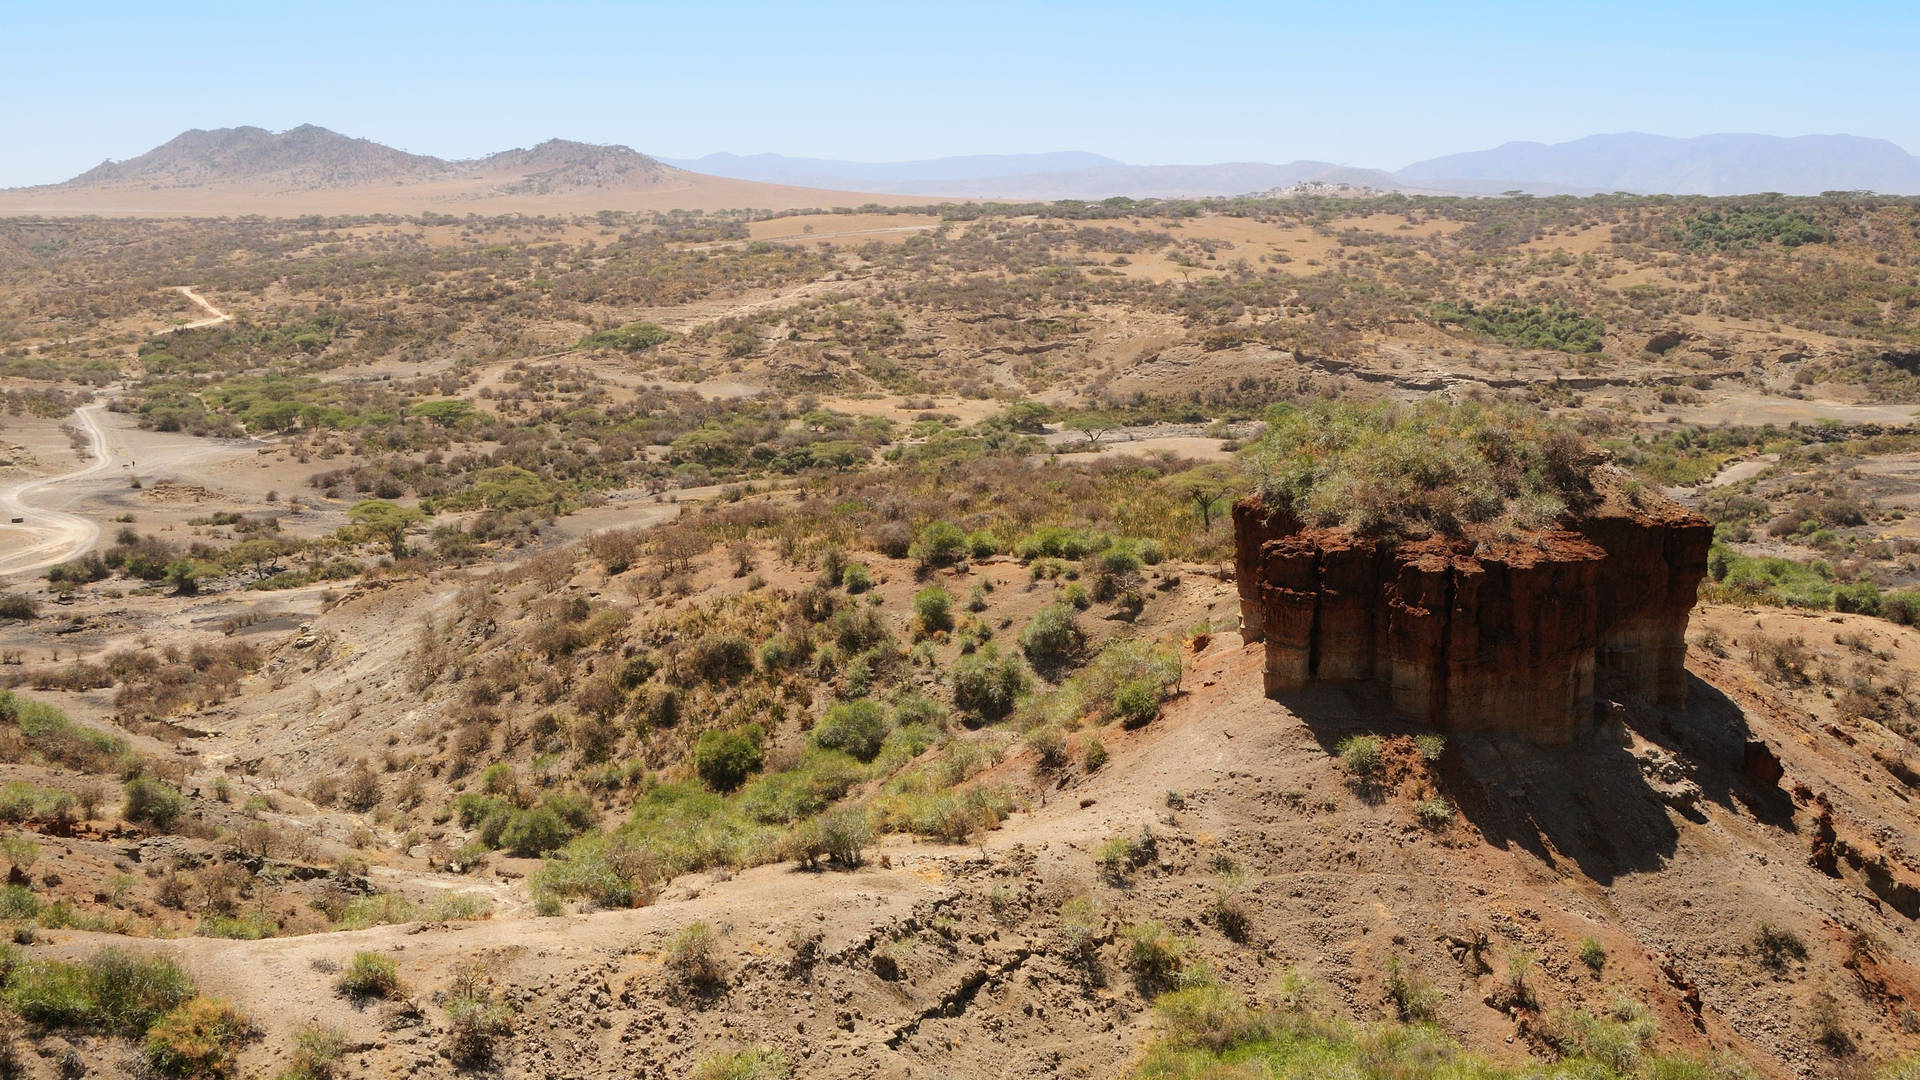 Tanzaniaolduvai Gorge In Spanish Could Be Translated As 